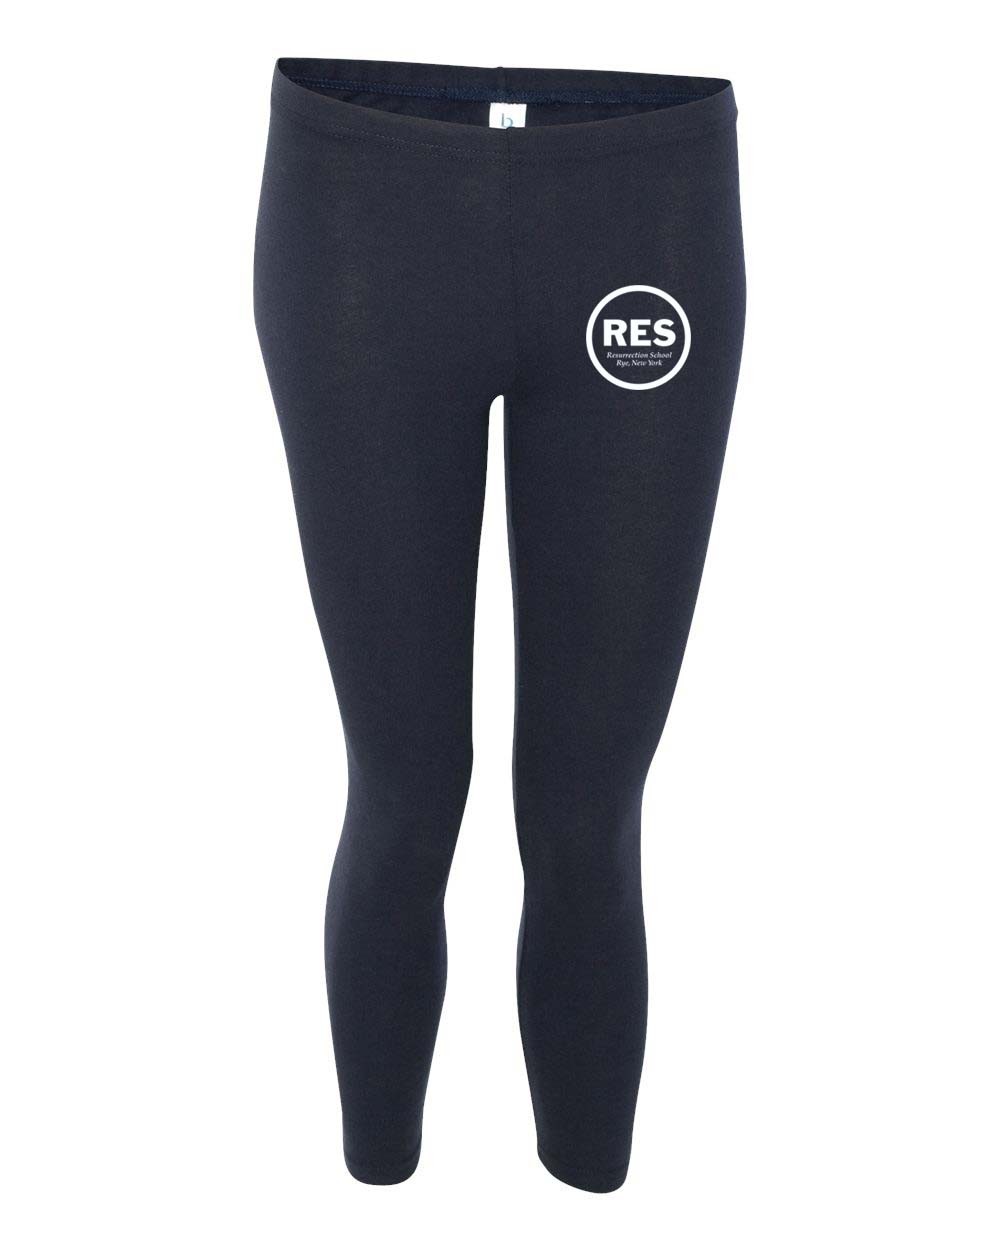 RES Spirit Wear Leggings w/ Logo - Please Allow 2-3 Weeks for Delivery